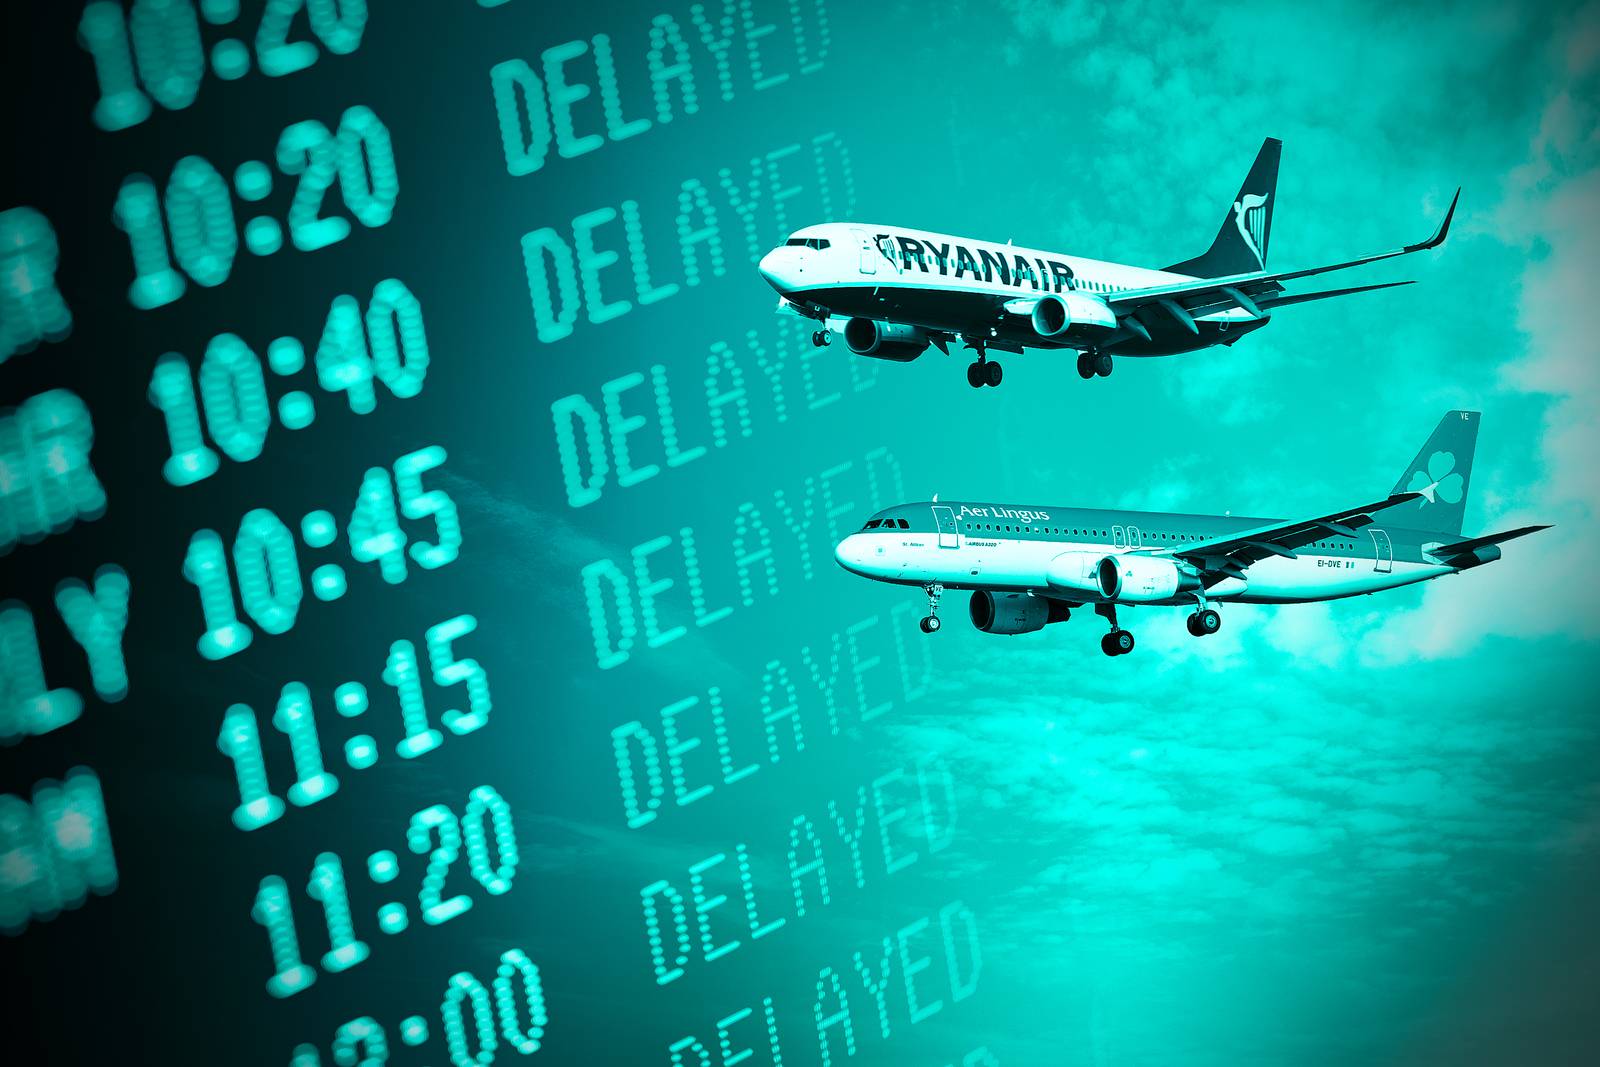 Dublin flights have been delayed and cancelled following a UK air traffic control issue.